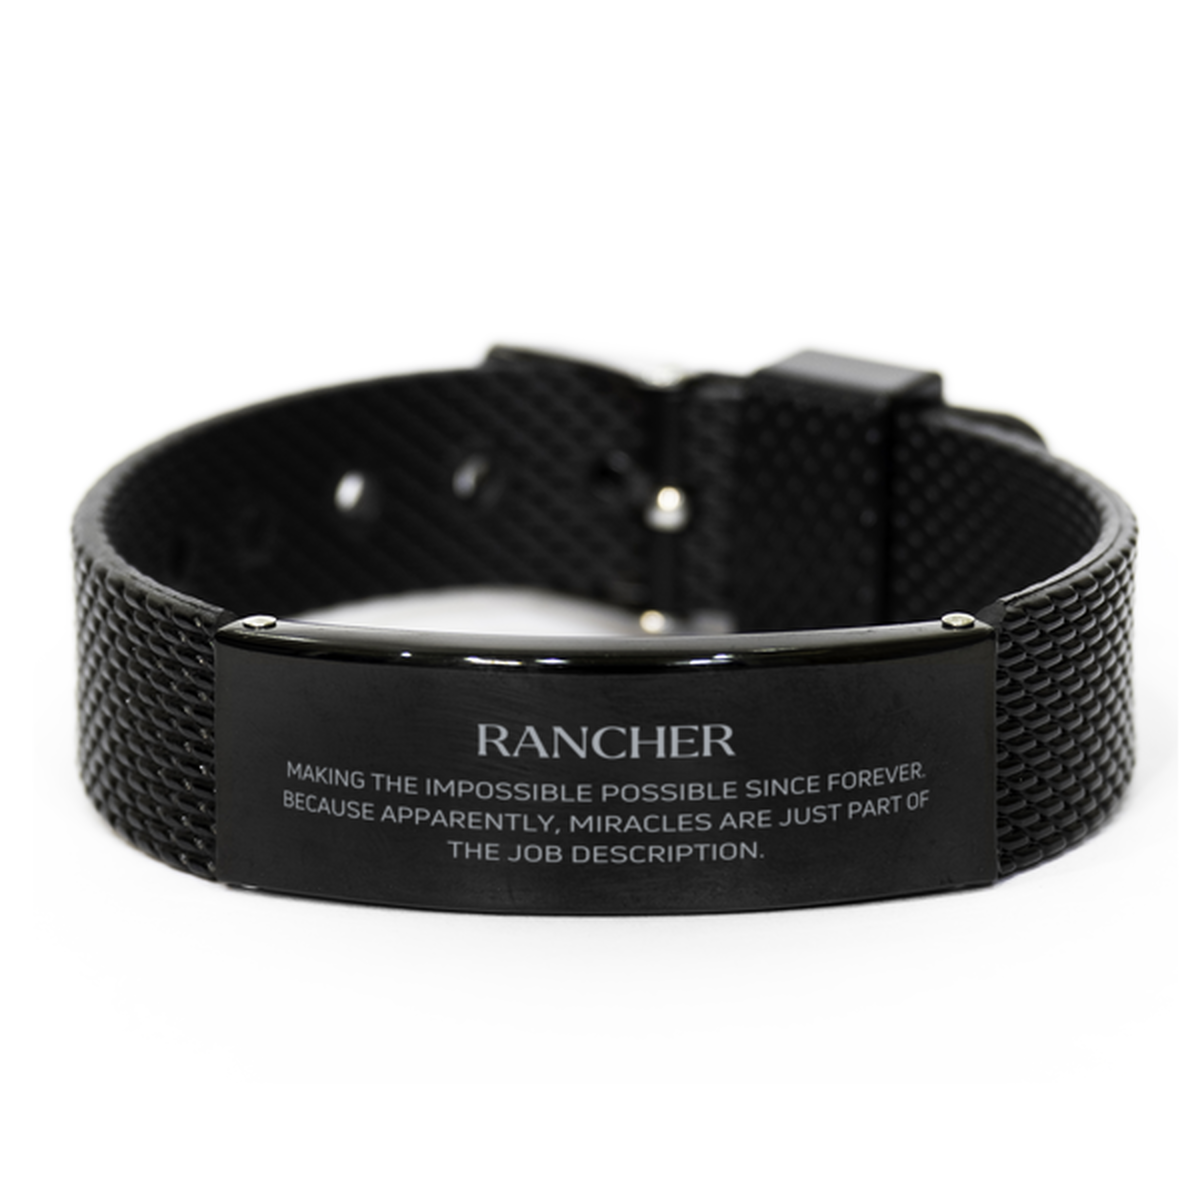 Funny Rancher Gifts, Miracles are just part of the job description, Inspirational Birthday Black Shark Mesh Bracelet For Rancher, Men, Women, Coworkers, Friends, Boss